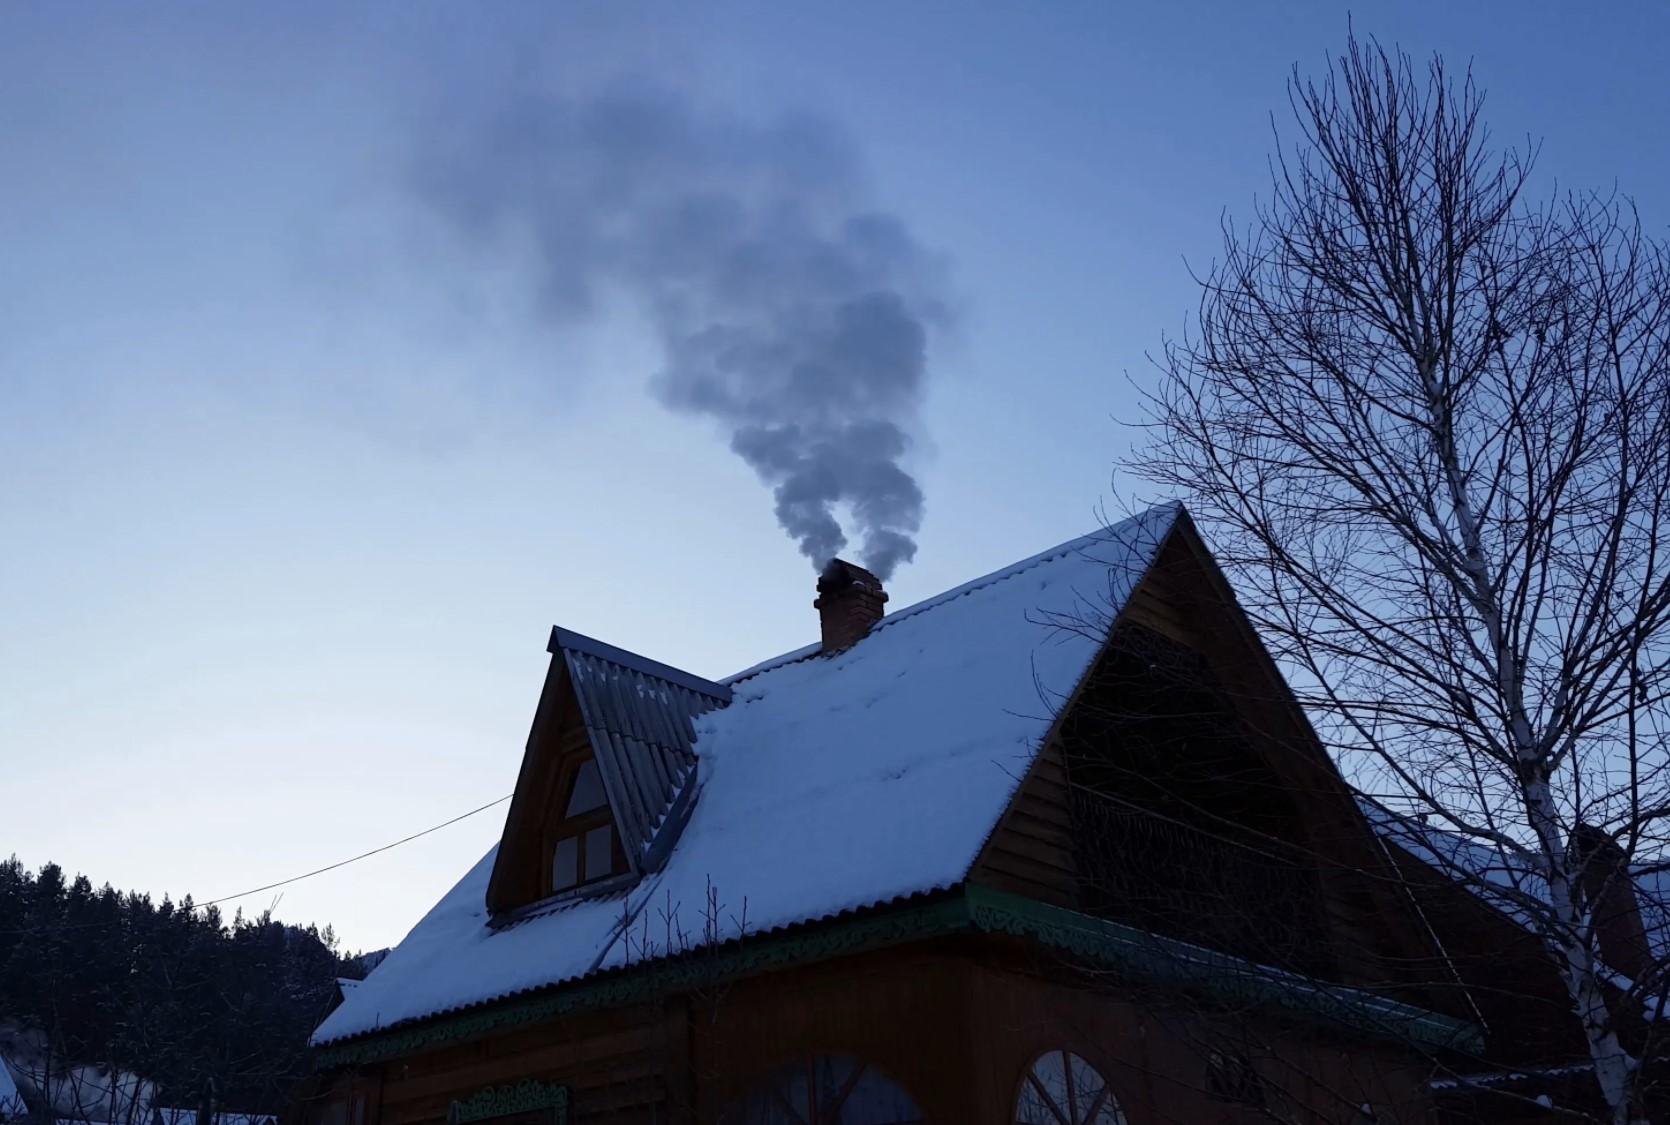 House in winter with snow on the roof and smoke coming from its chimney